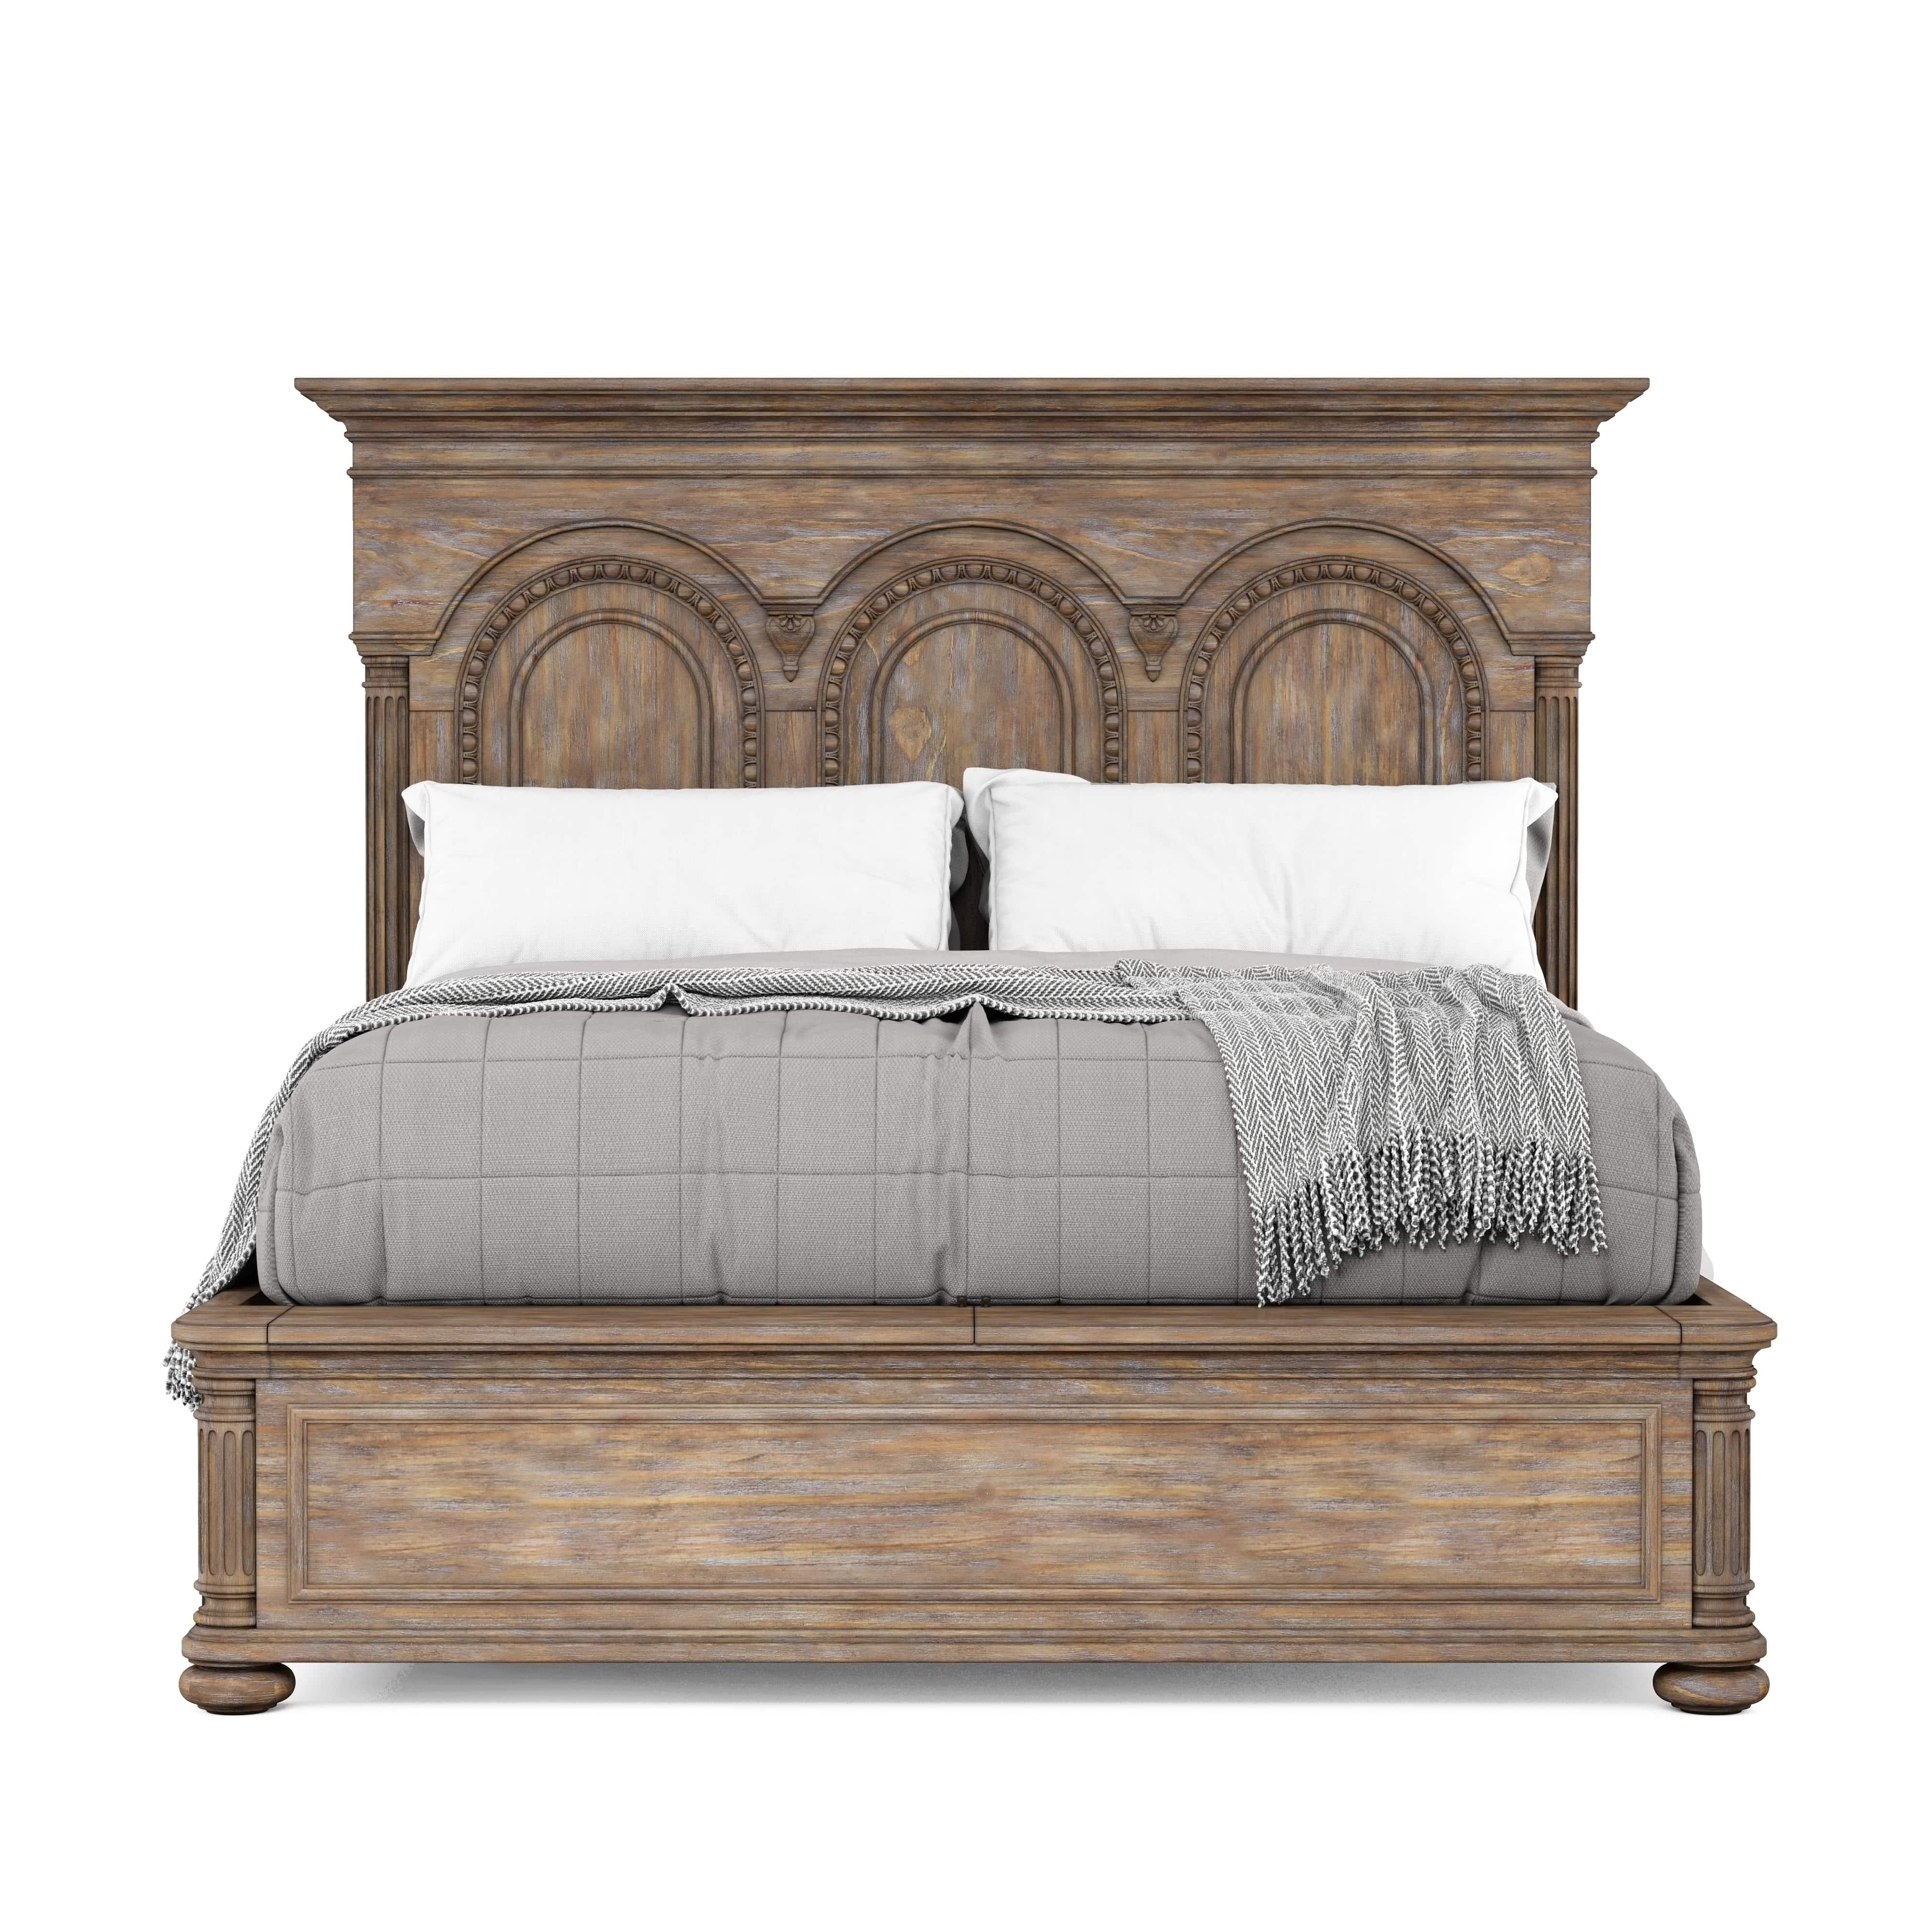 Traditional, Farmhouse Panel Bed Architrave 277136-2608 in Brown 